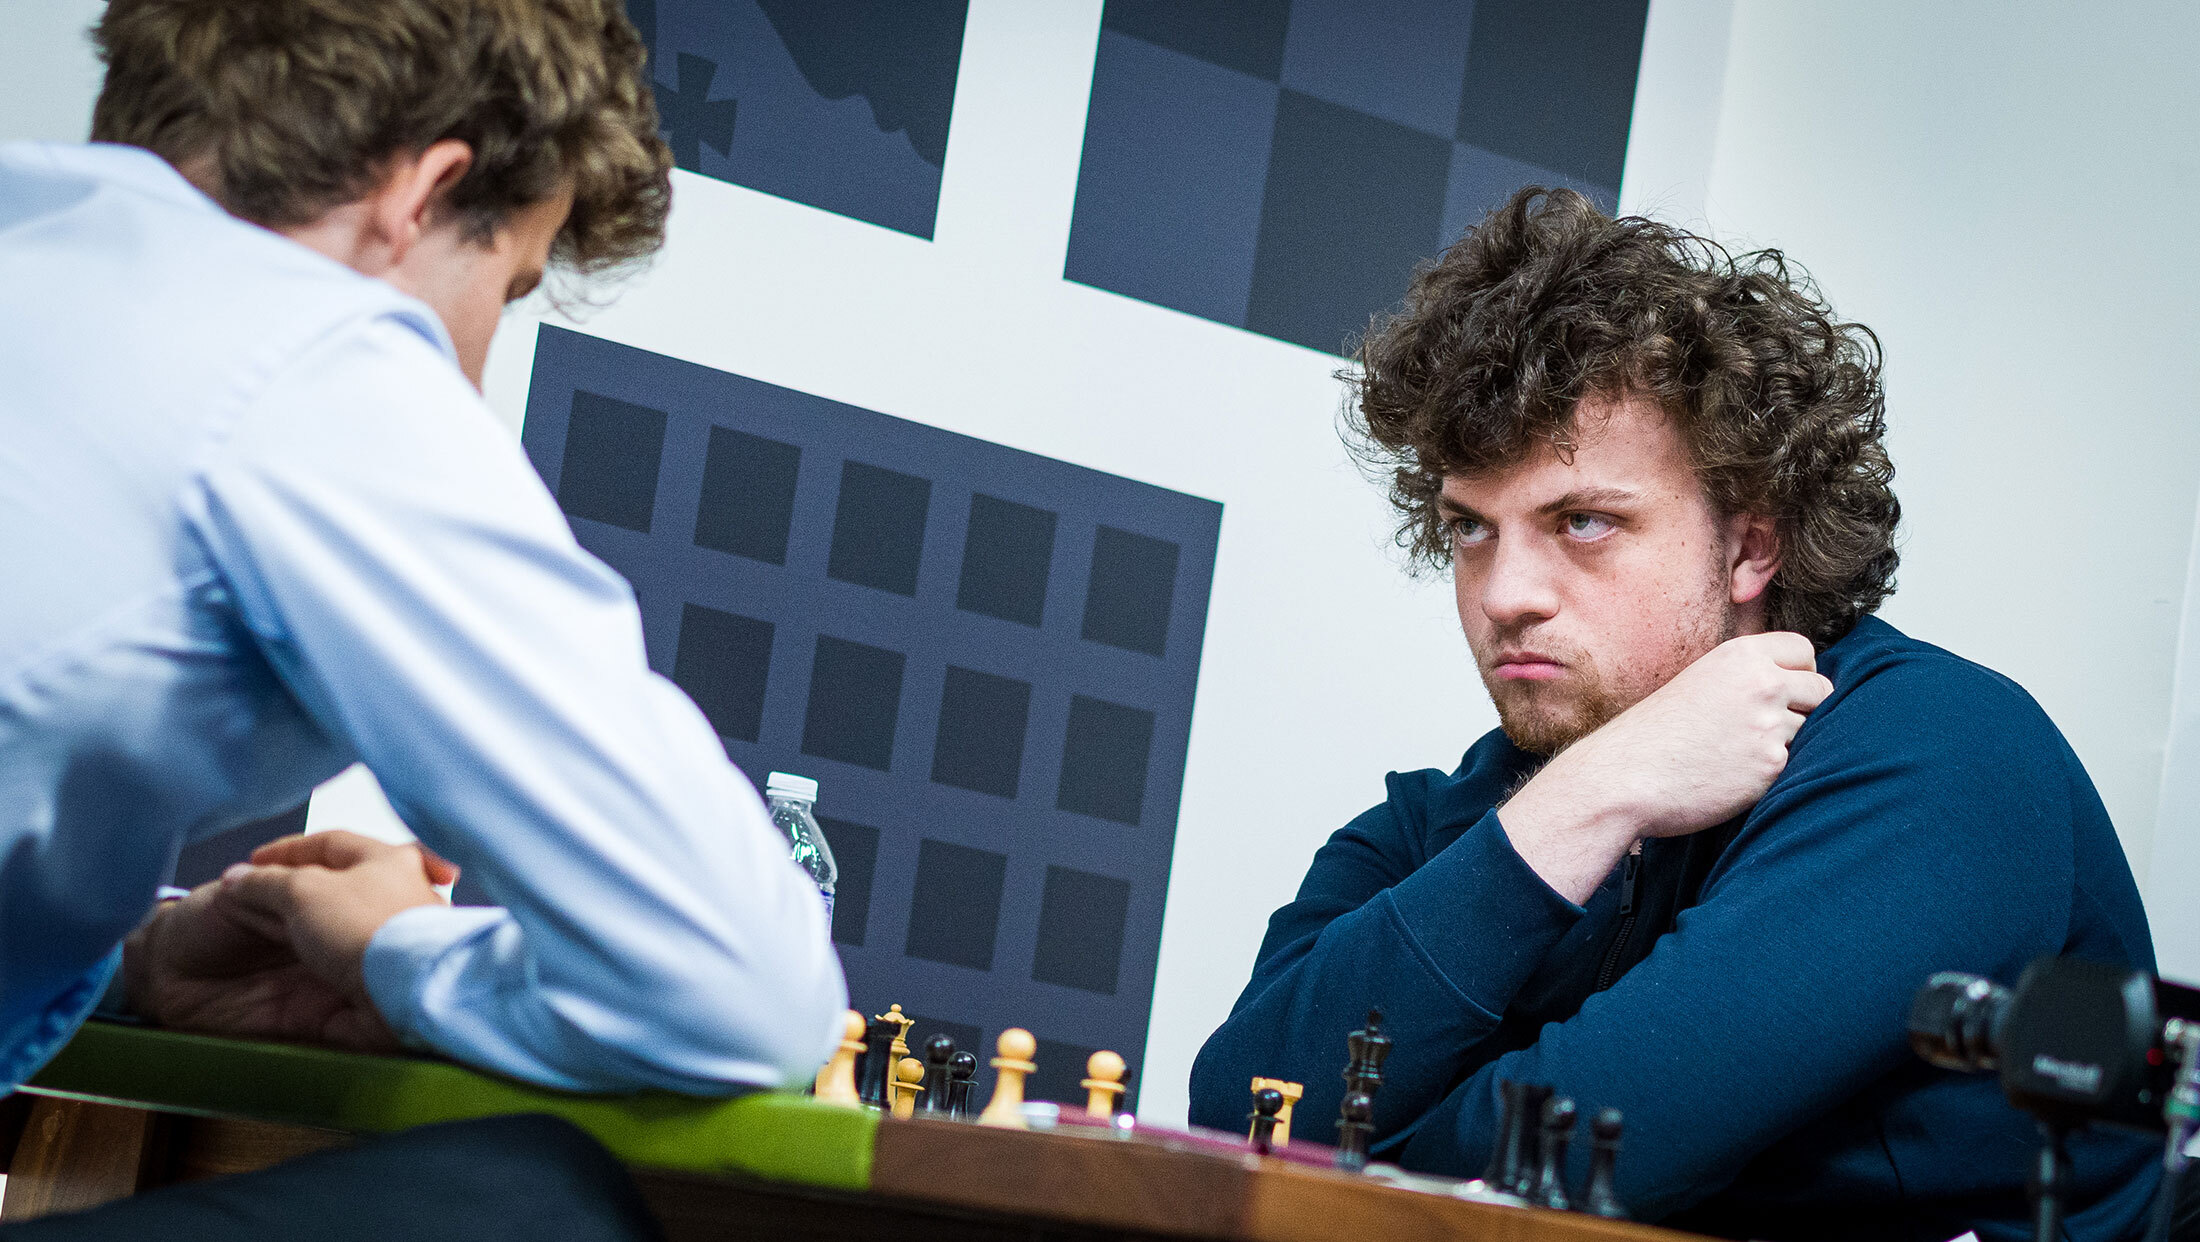 Magnus Carlsen wins with the London System - Remote Chess Academy